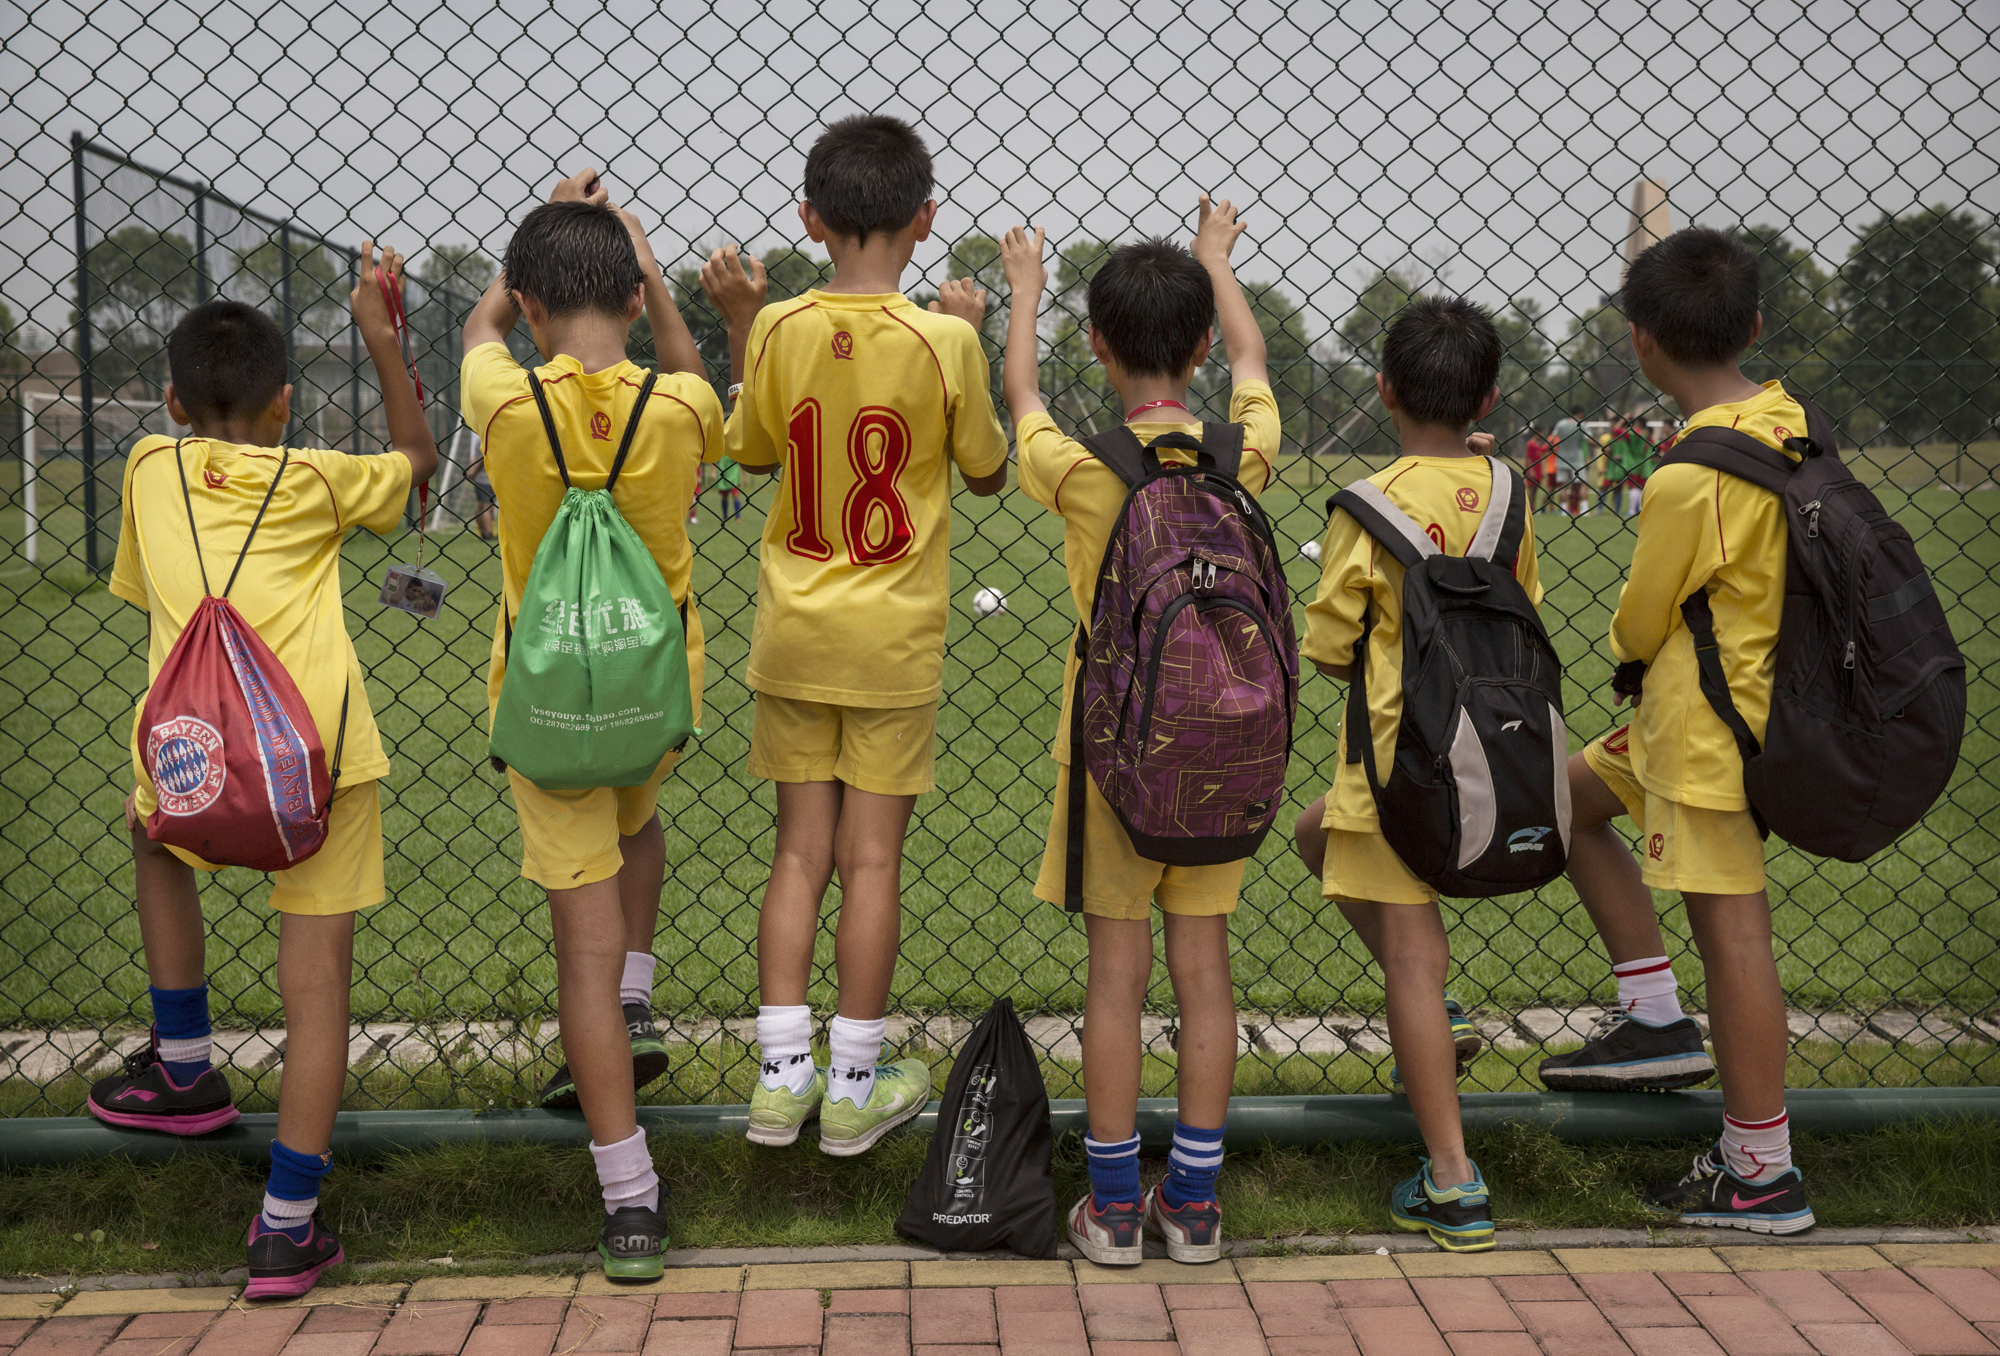 Players watch others train at the Evergrande International Football School.